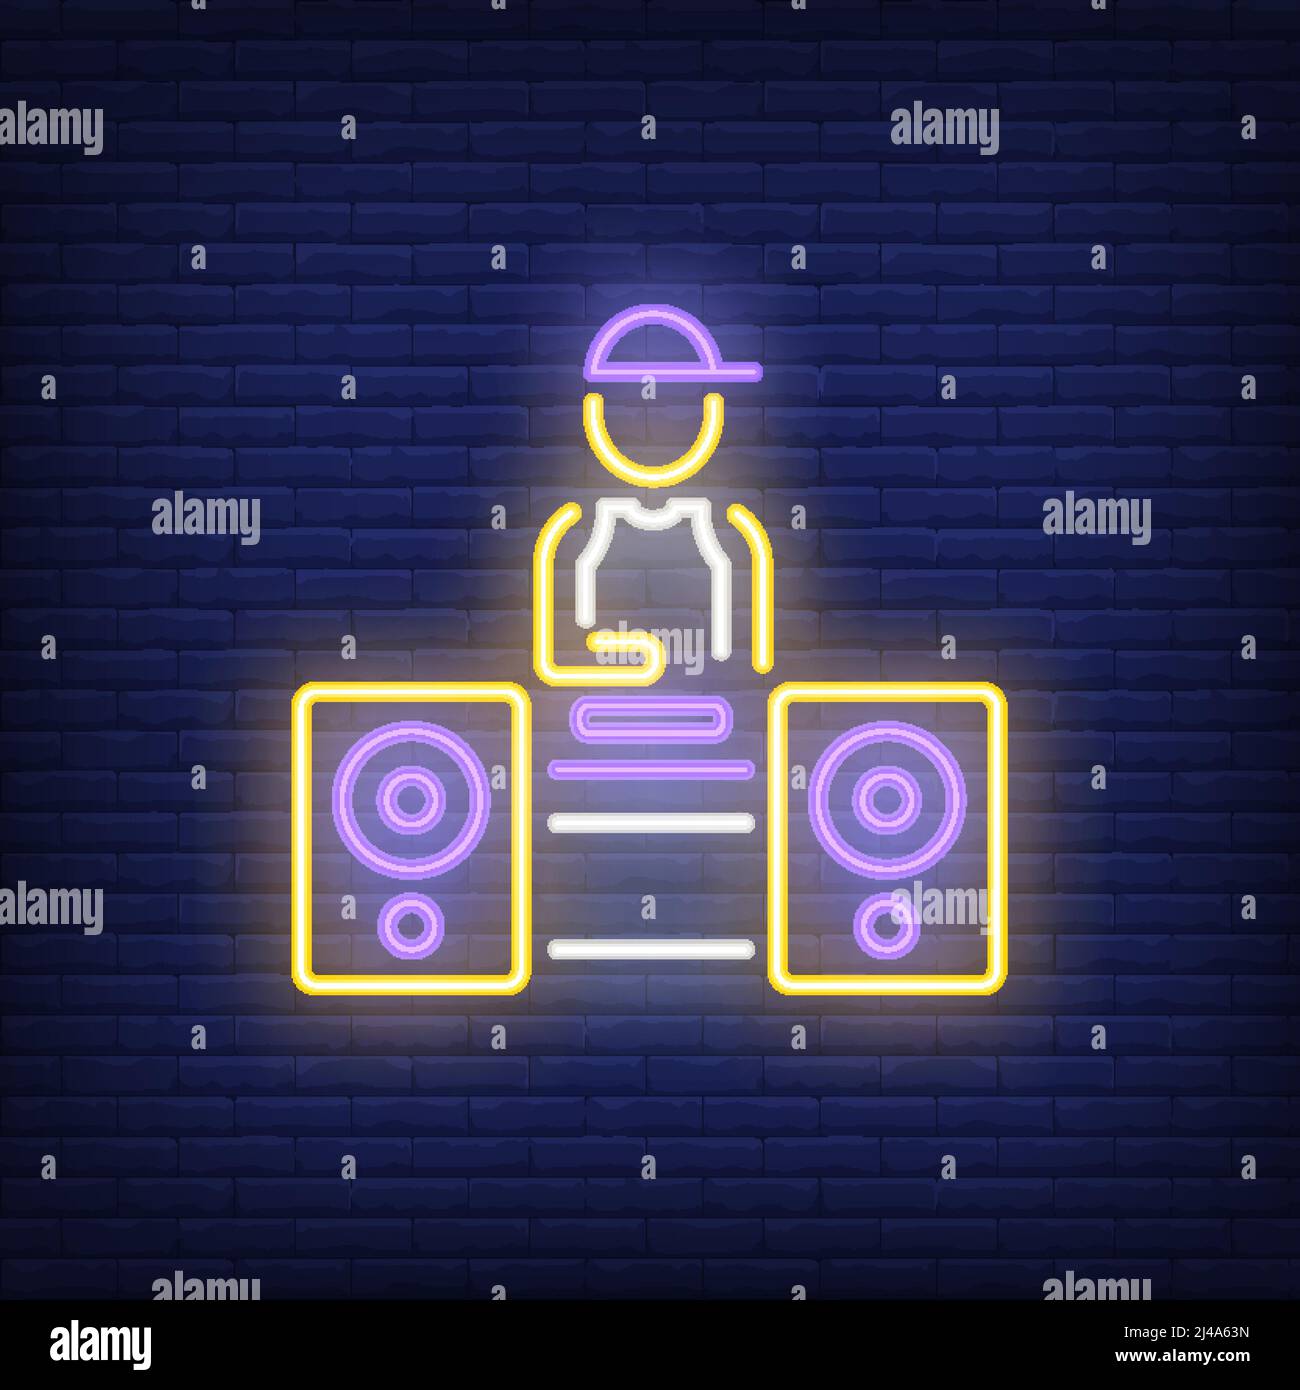 Disc jockey neon sign. Luminous signboard with dj at turntable. Night bright advertisement. Vector illustration in neon style for music, party, nightl Stock Vector